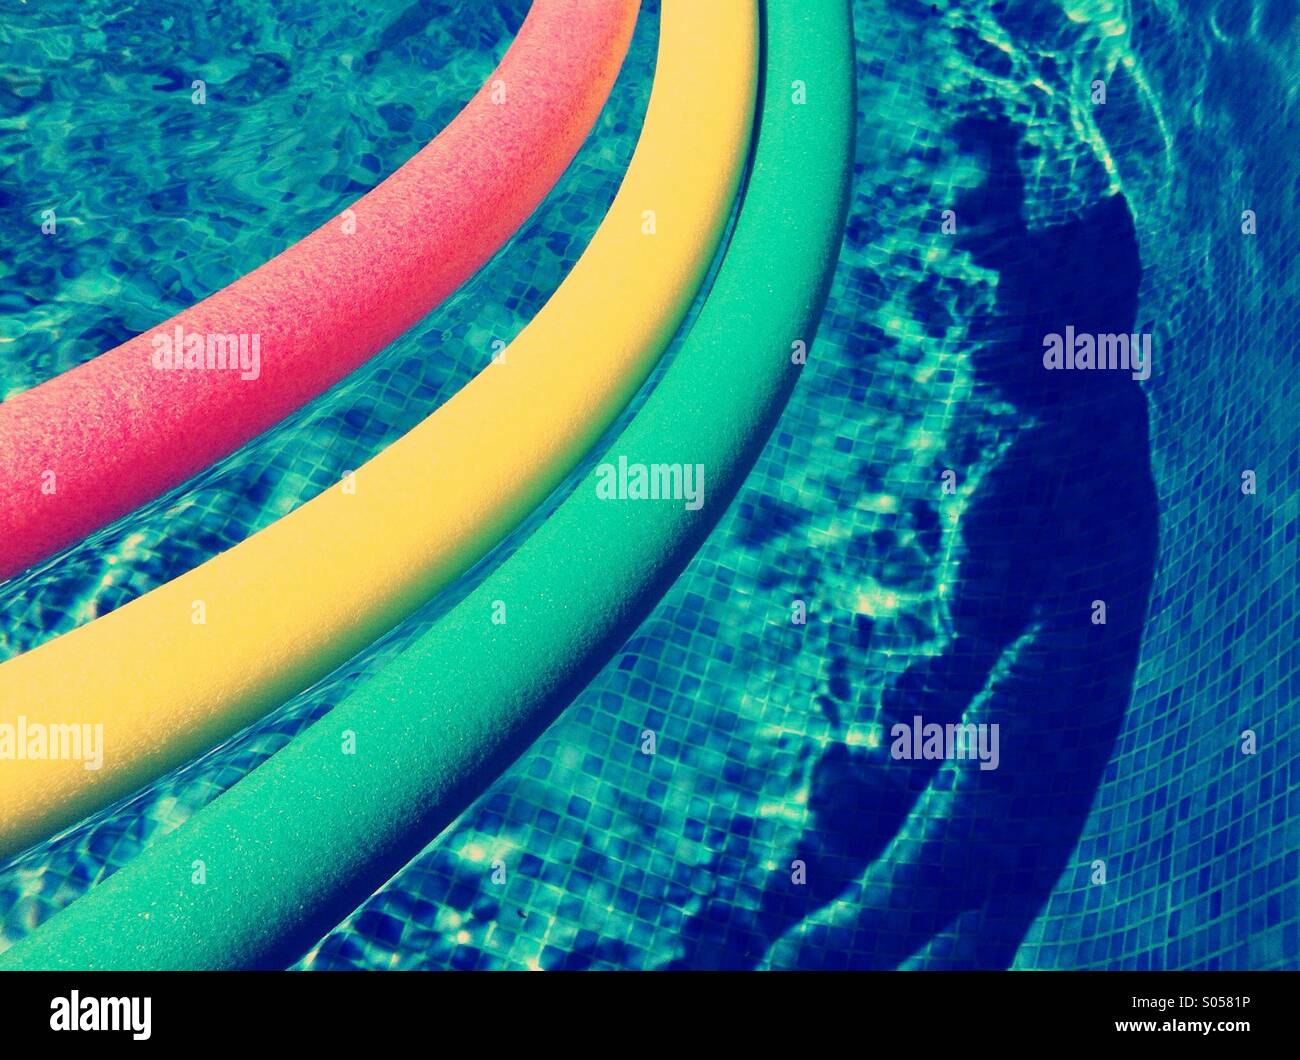 Abstract of foam floats in a swimming pool Stock Photo - Alamy